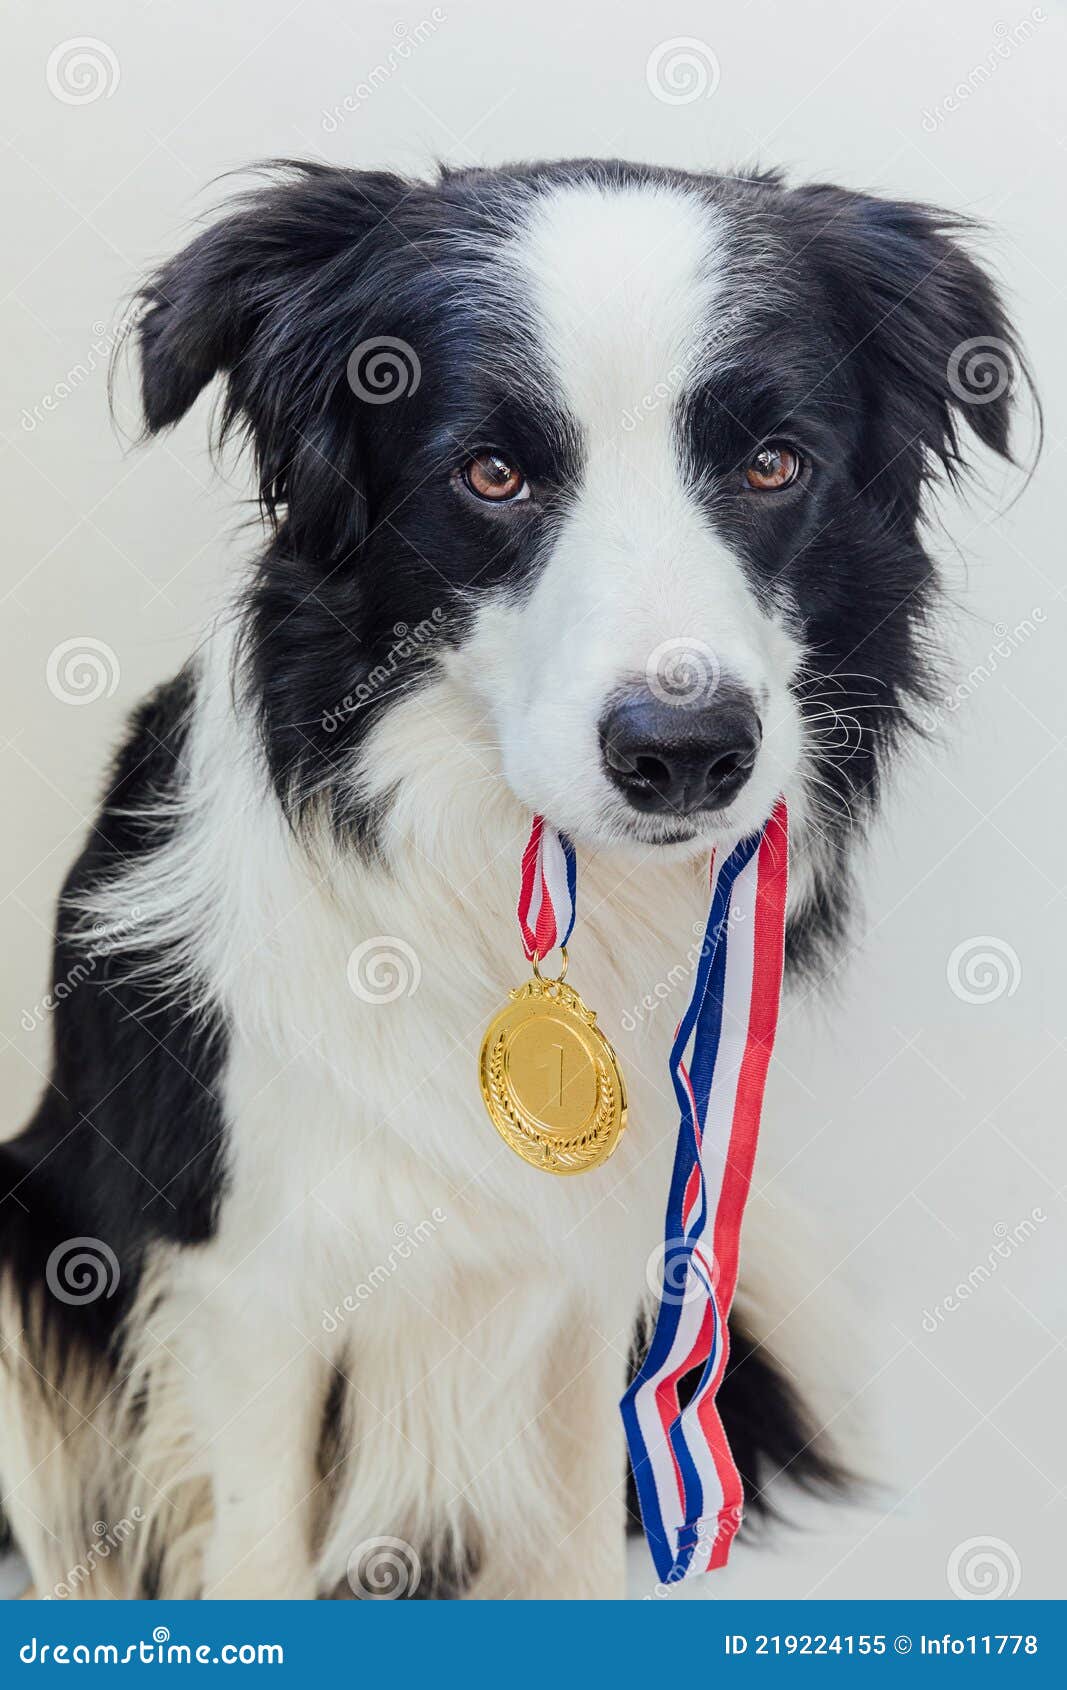 Puppy Dog Border Collie Holding Winner or Champion Gold Trophy Medal in Mouth Isolated on White Background. Winner Stock Image - Image of portrait, contest: